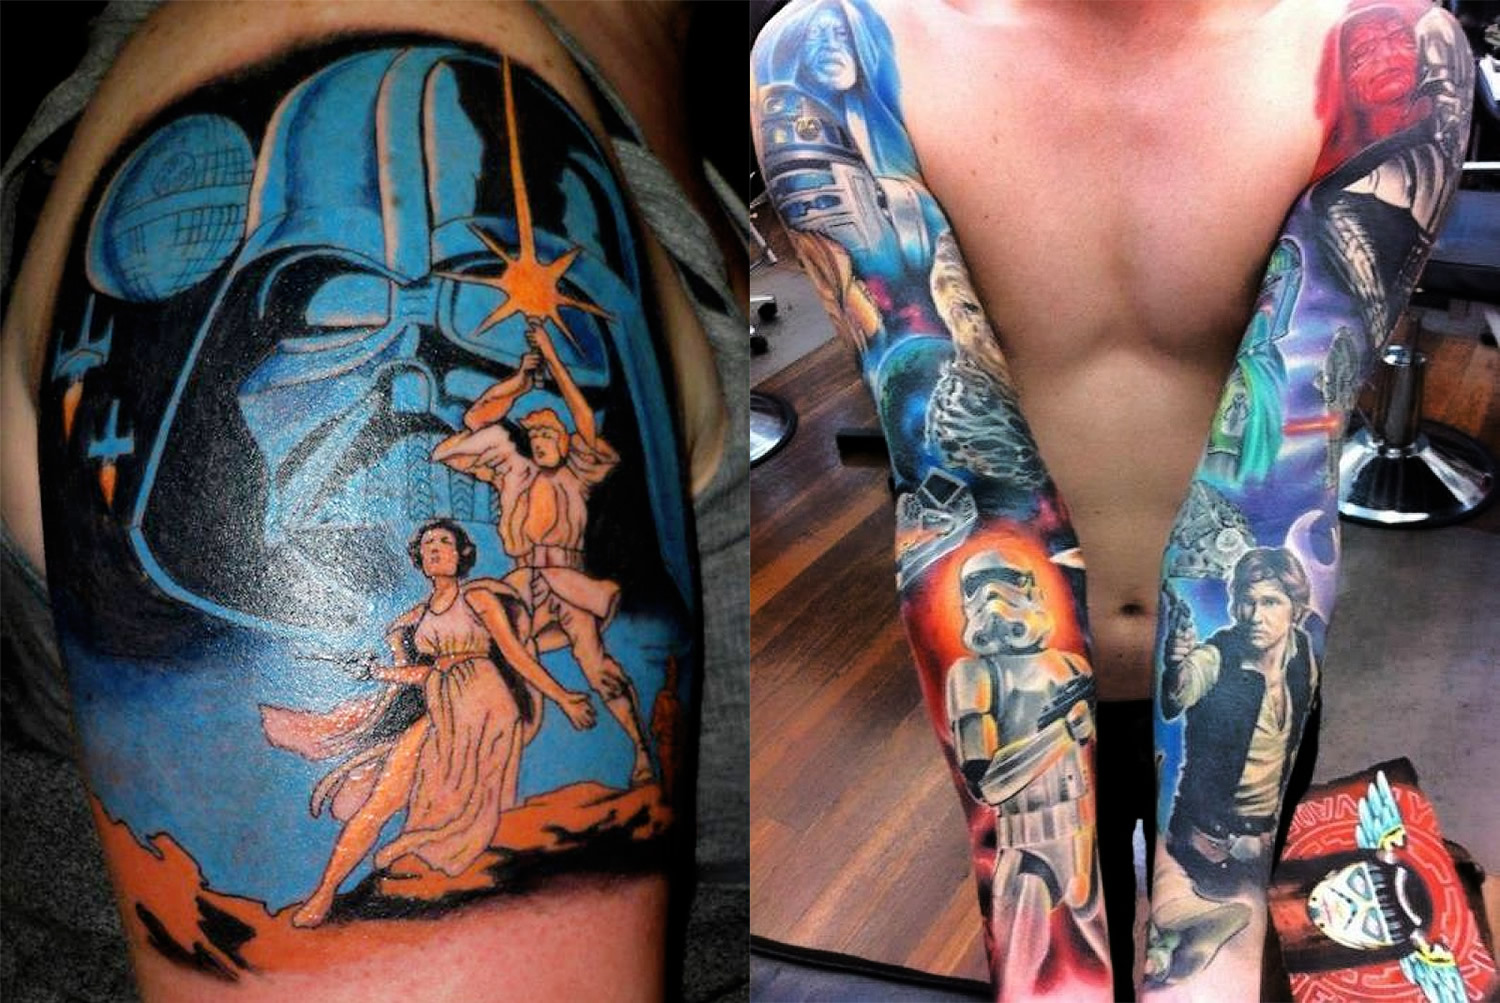 darth vader, star wars comic style and elaborate sleeve with star wars characters